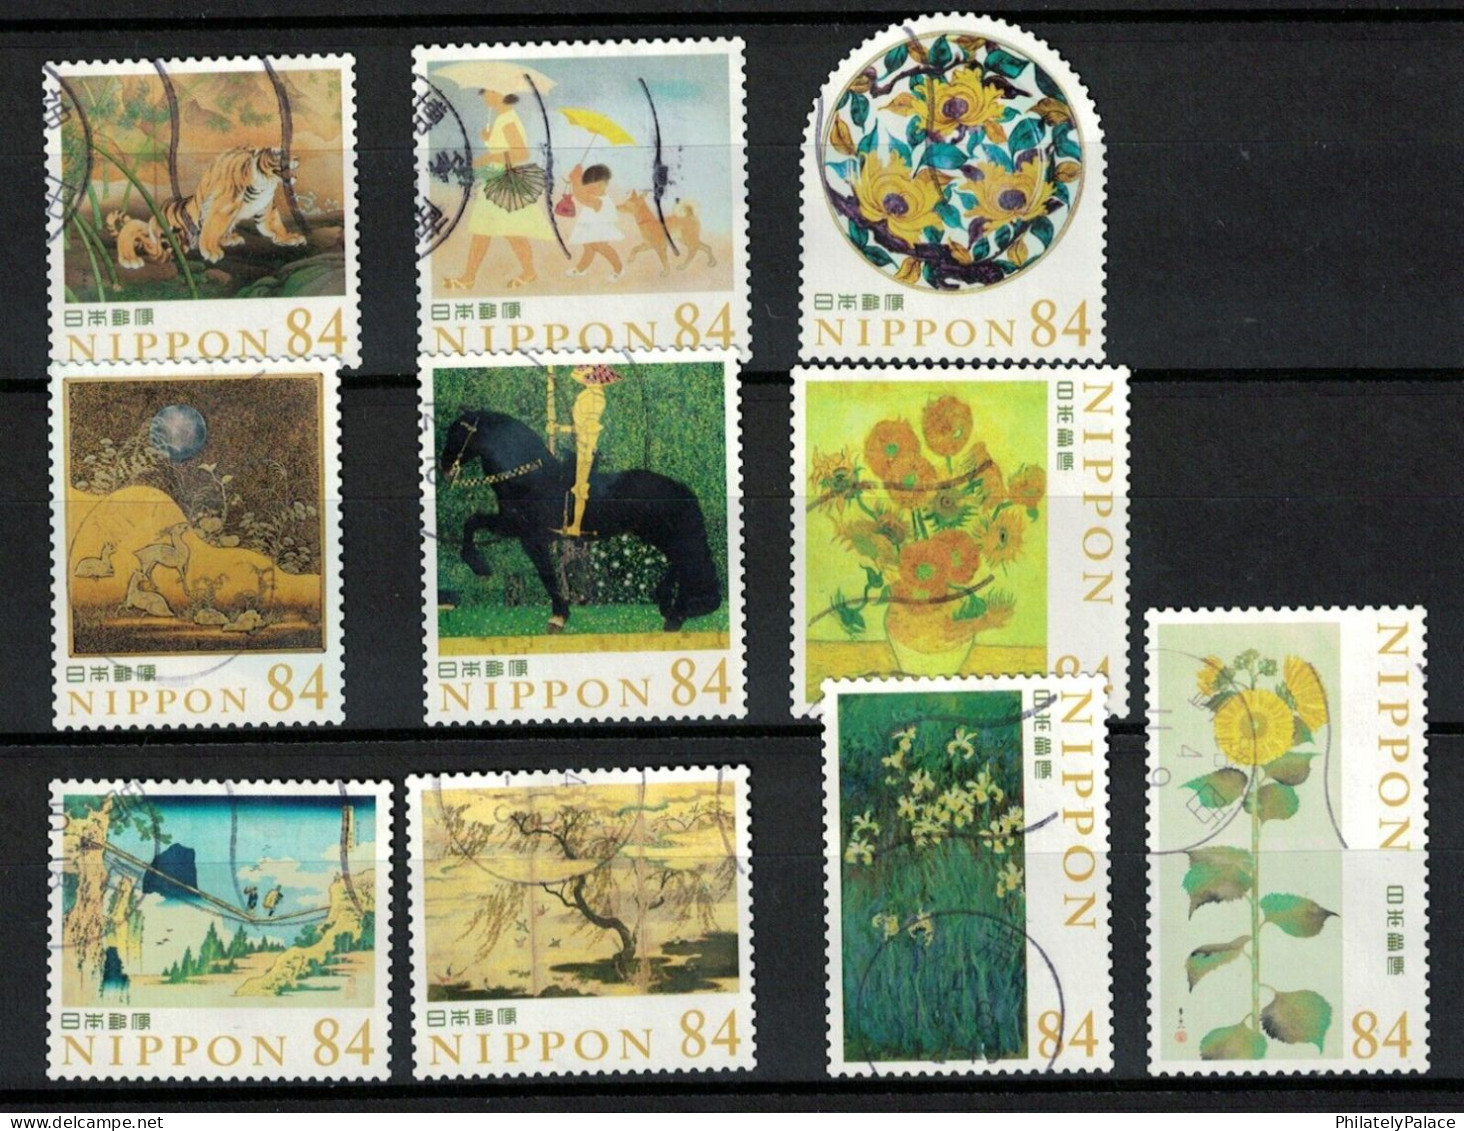 JAPAN 2022 WORLD OF ARTS SERIES NO. 4 84 YEN COMP. SET OF 10 STAMPS IN FINE USED (**) - Used Stamps